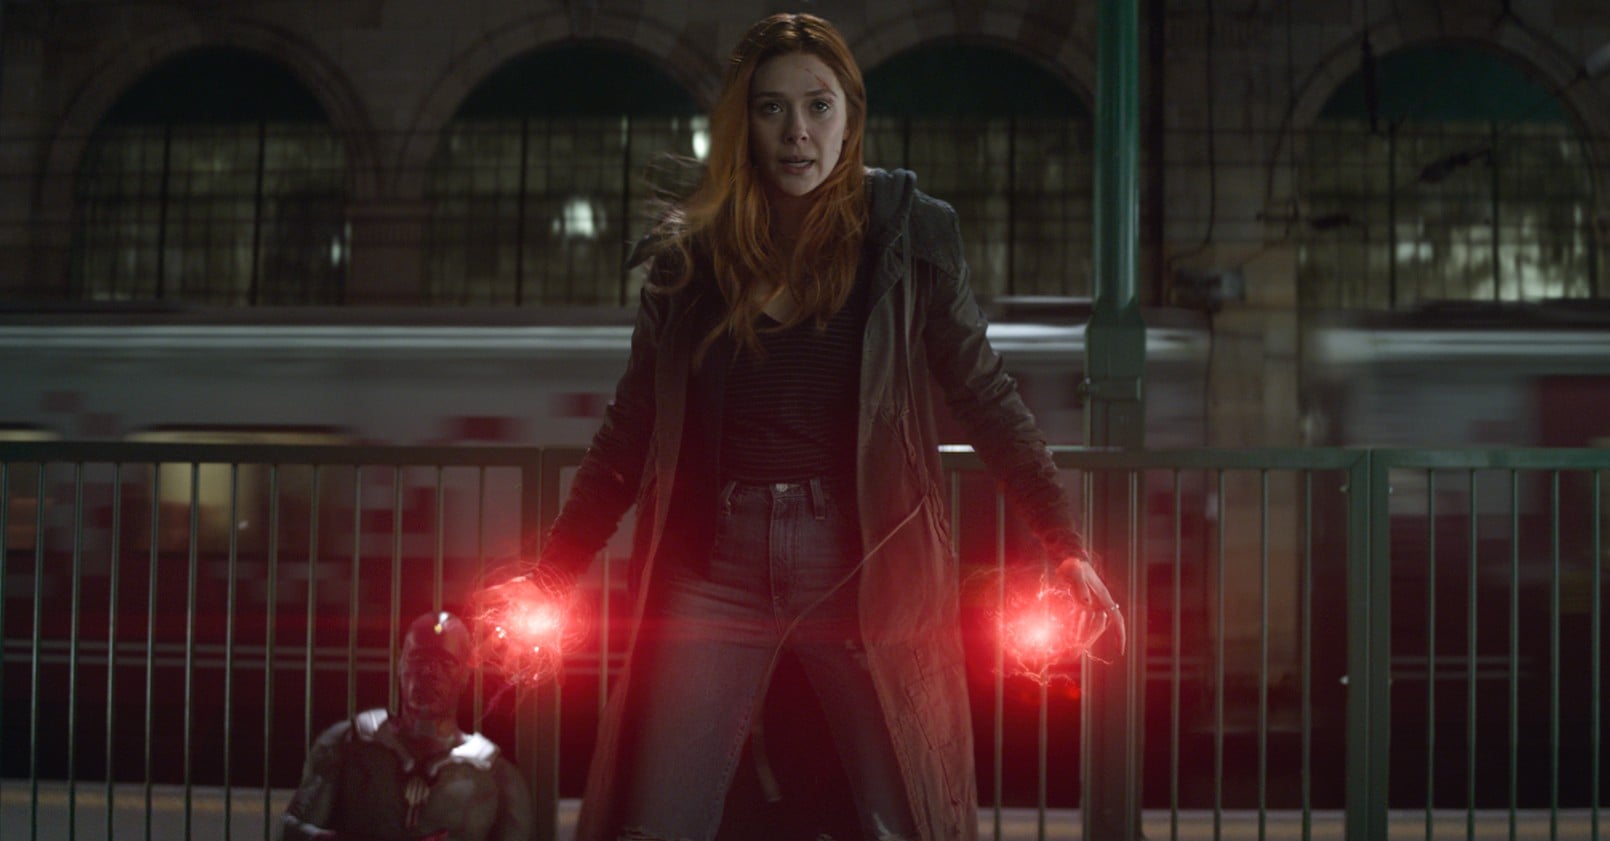 What I Heard: What's Next for The Scarlet Witch